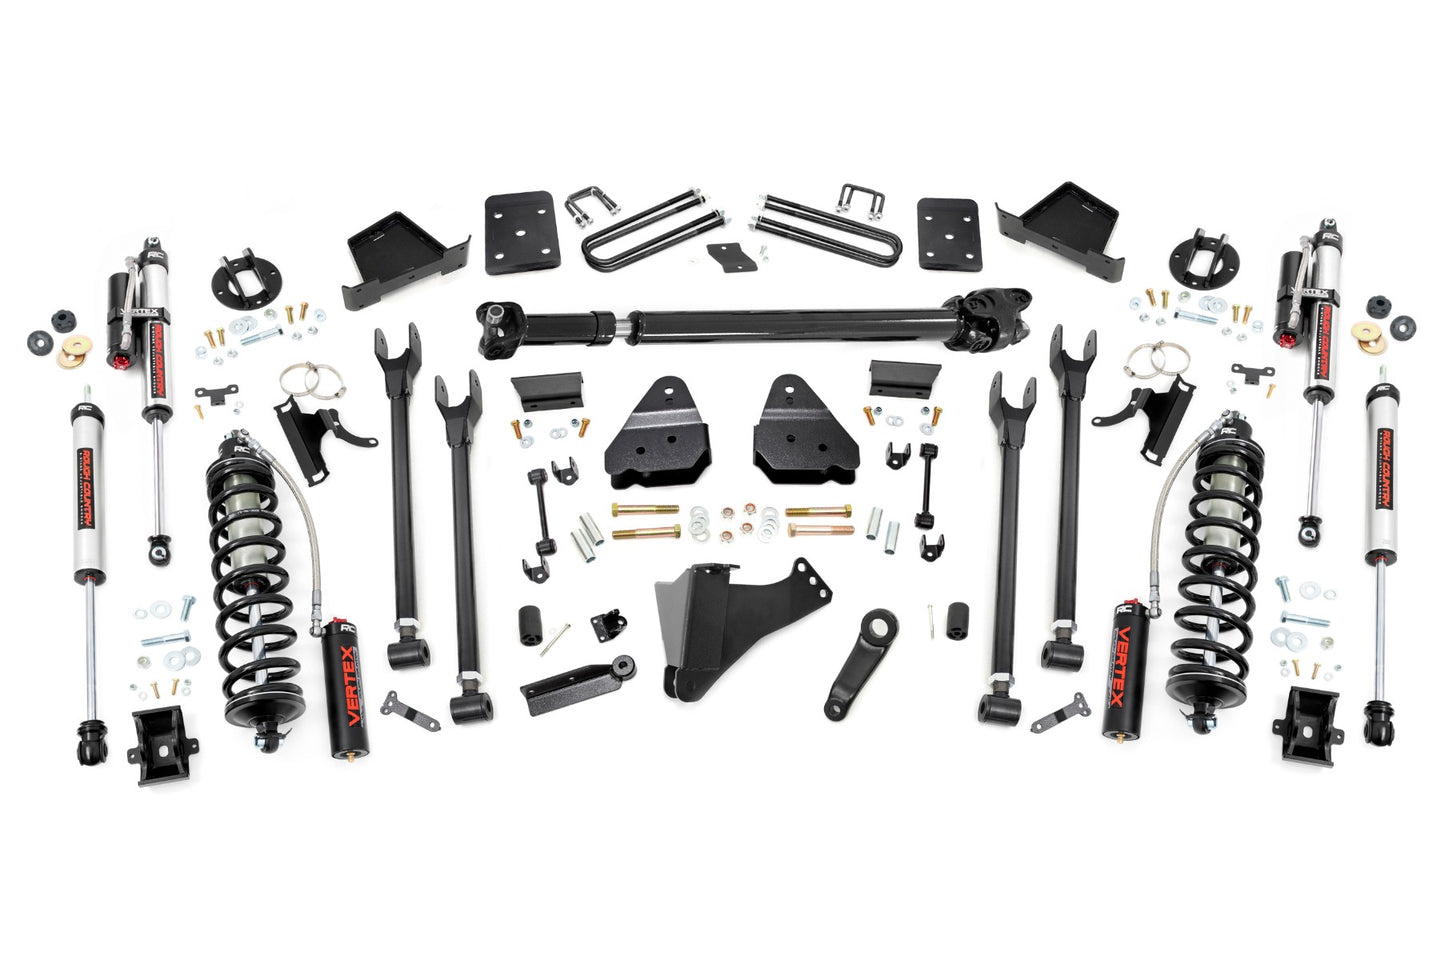 Rough Country 6 Inch Lift Kit  |  Diesel  |  4 Link  |  D/S  |  C/O Vertex | Ford Super Duty (17-22)